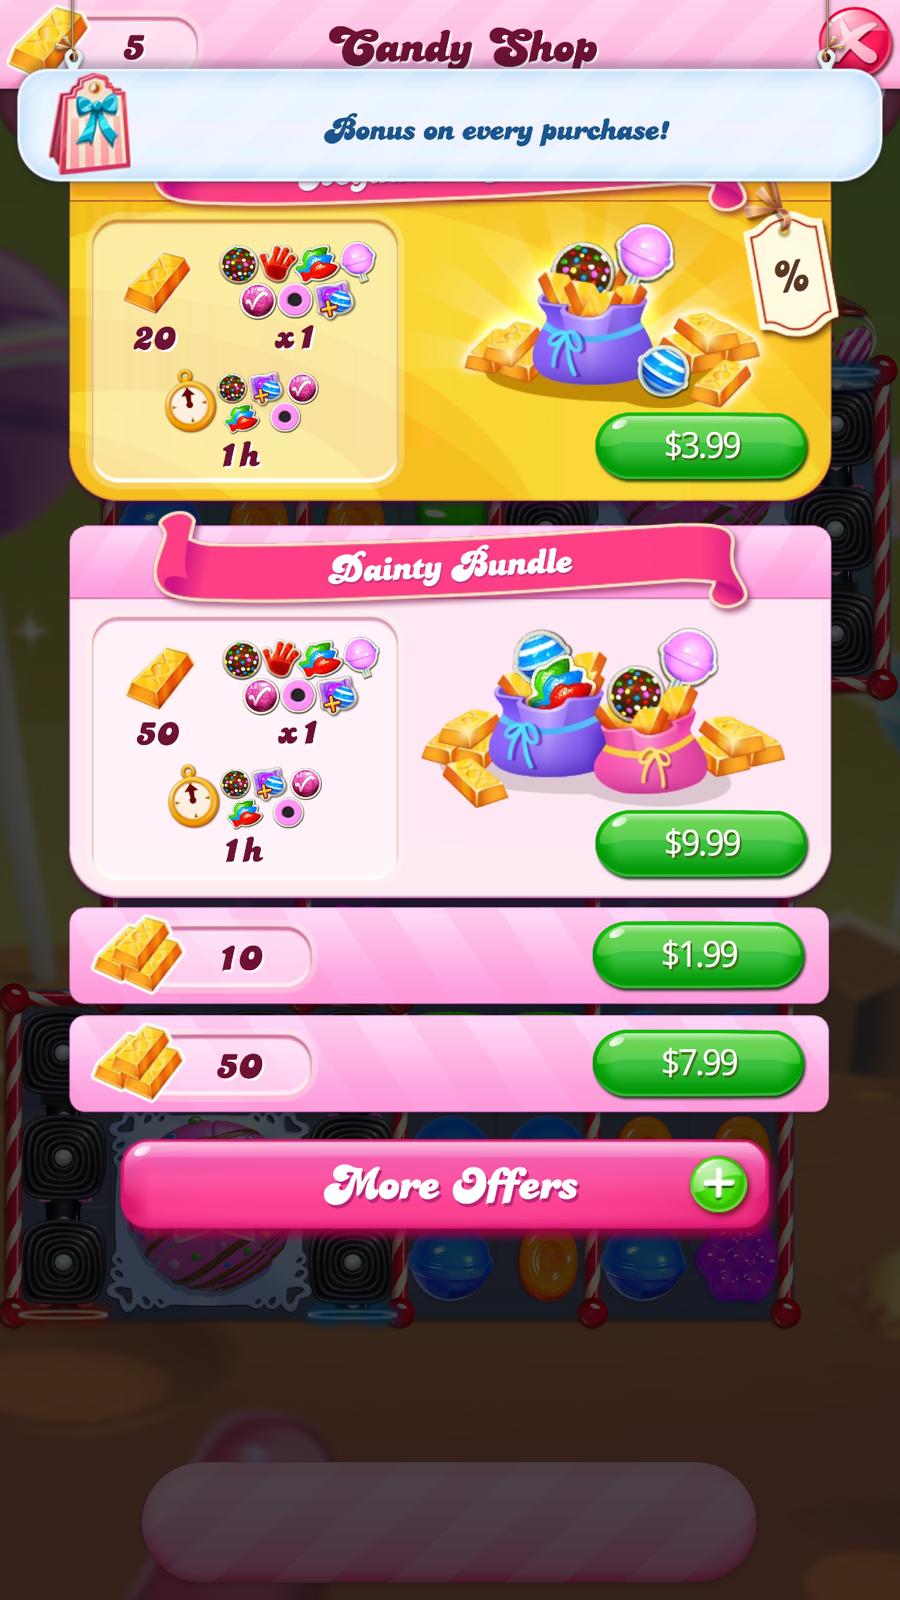 A screenshot of in-app purchase options for Candy Crush Saga